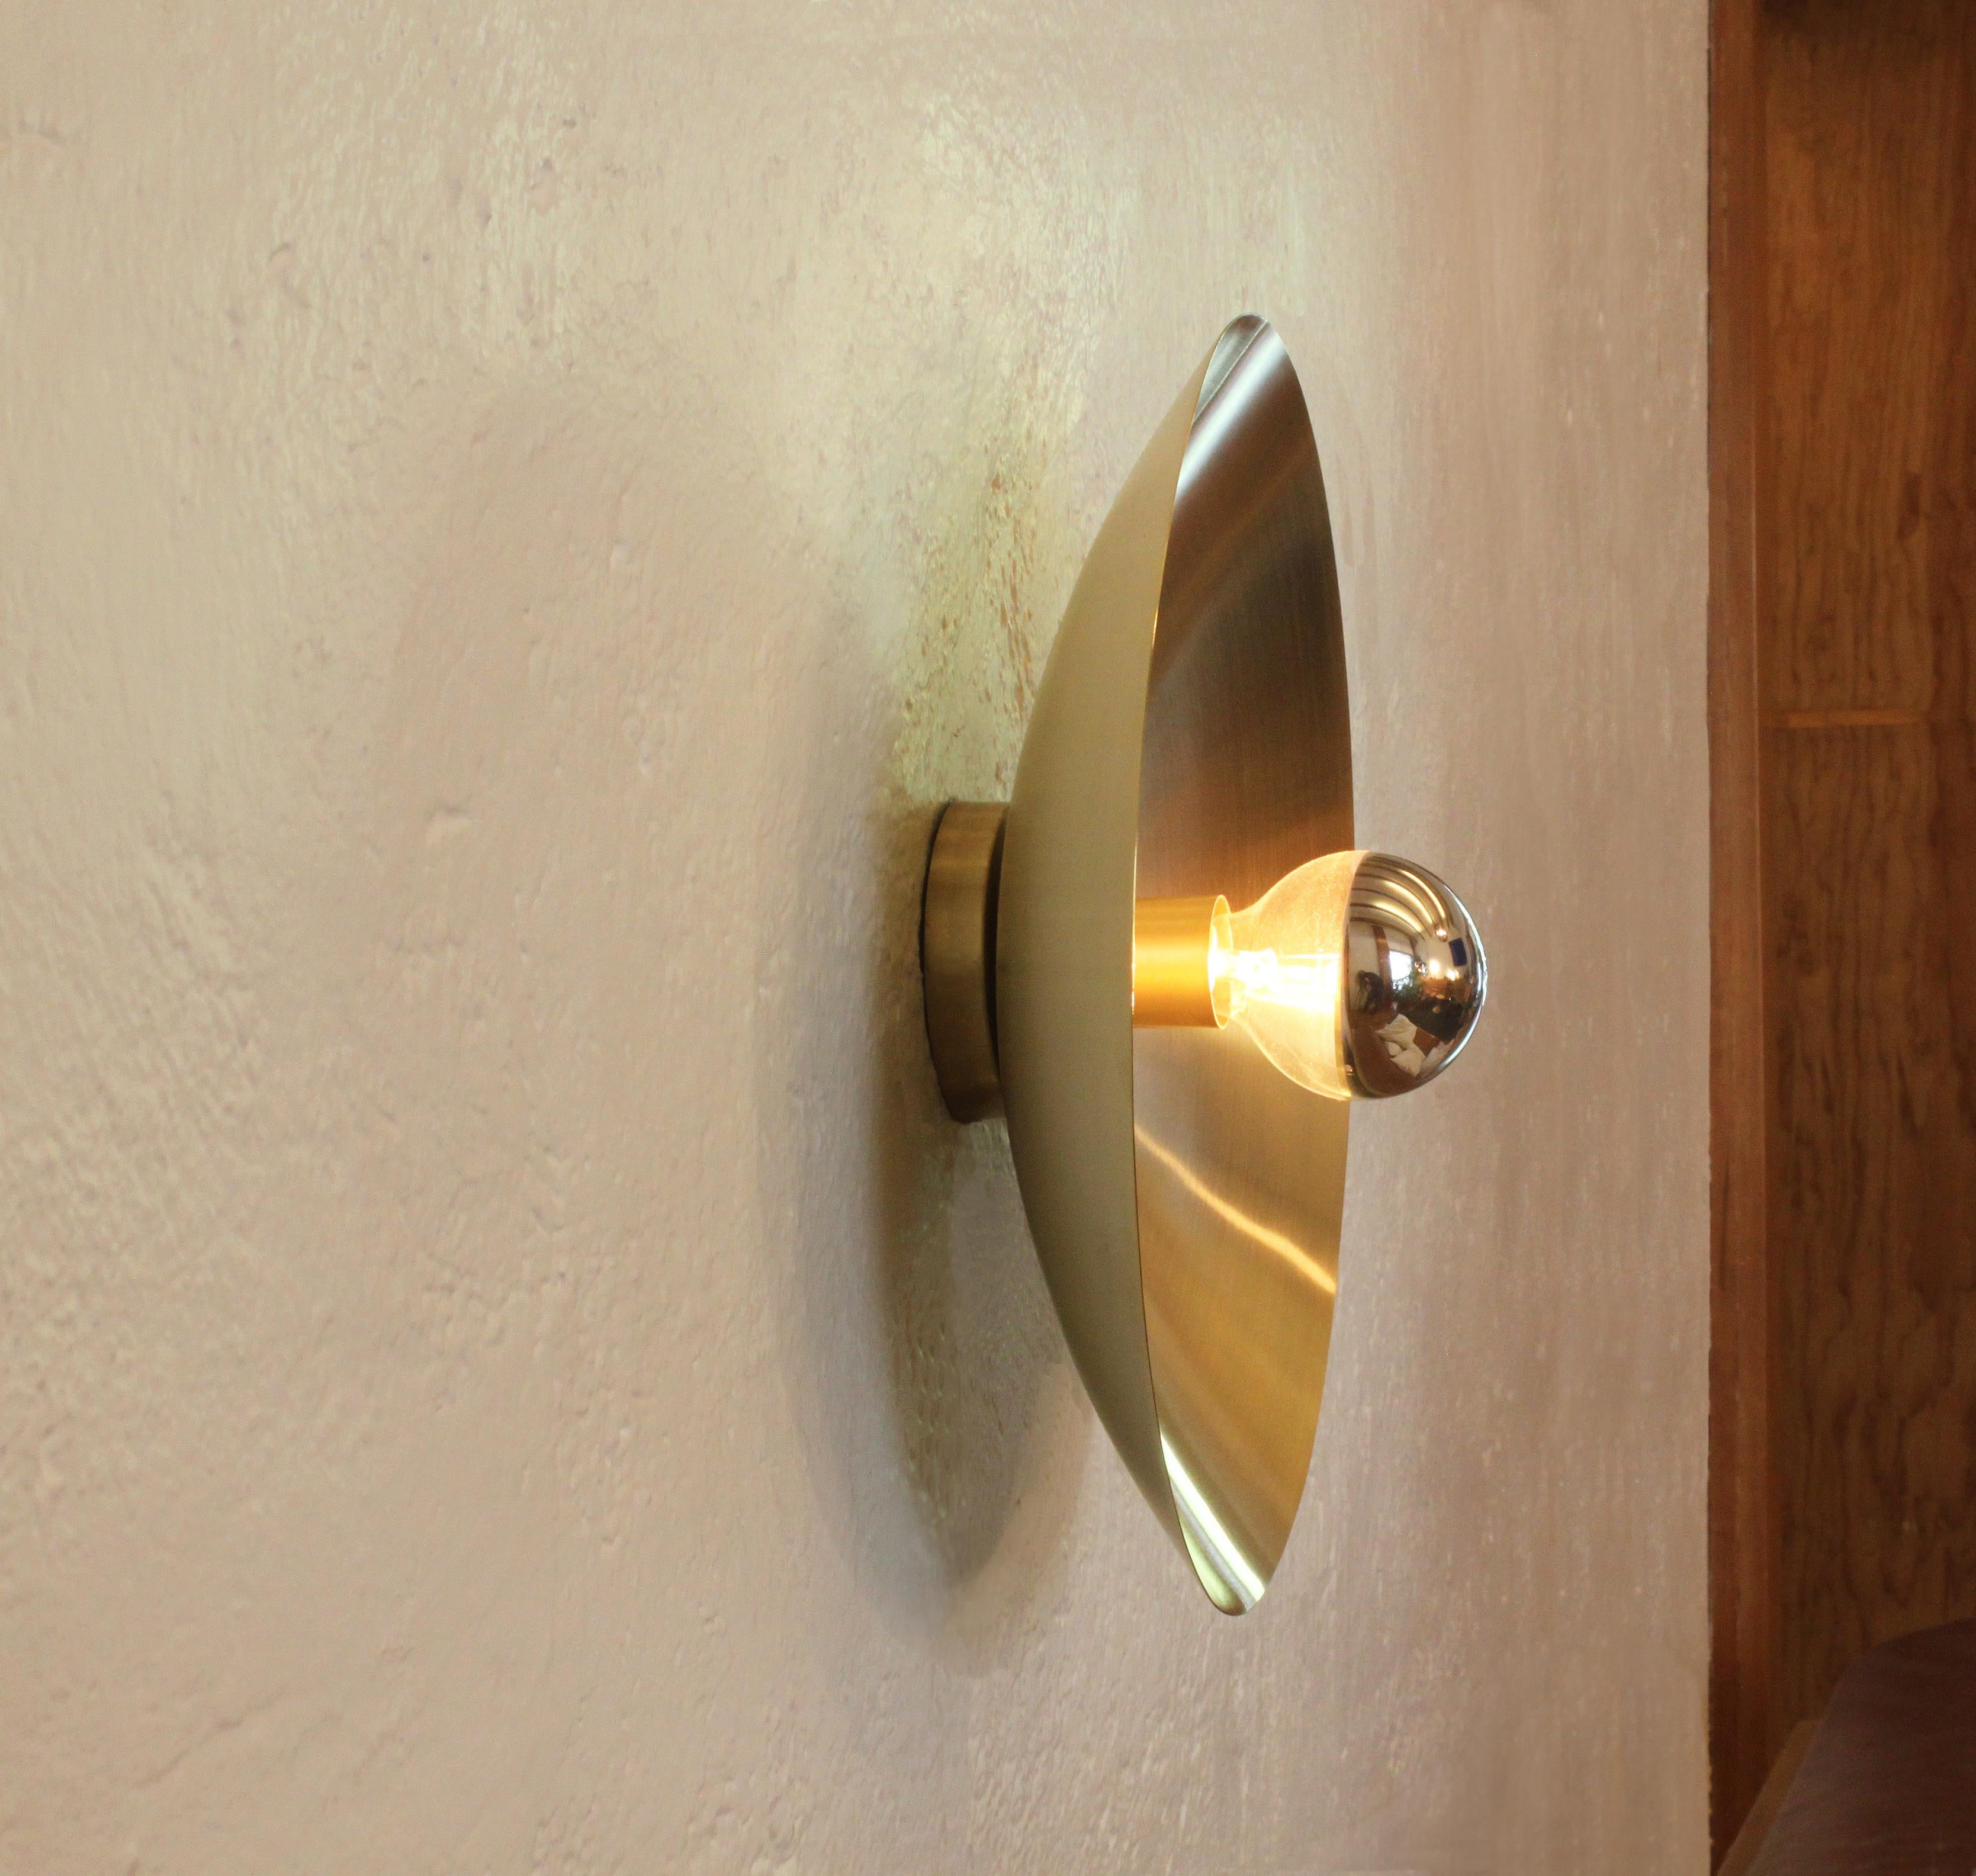 Plato Fuera 40 Wall Sconce by Maria Beckmann, Represented by Tuleste Factory In New Condition For Sale In New York, NY